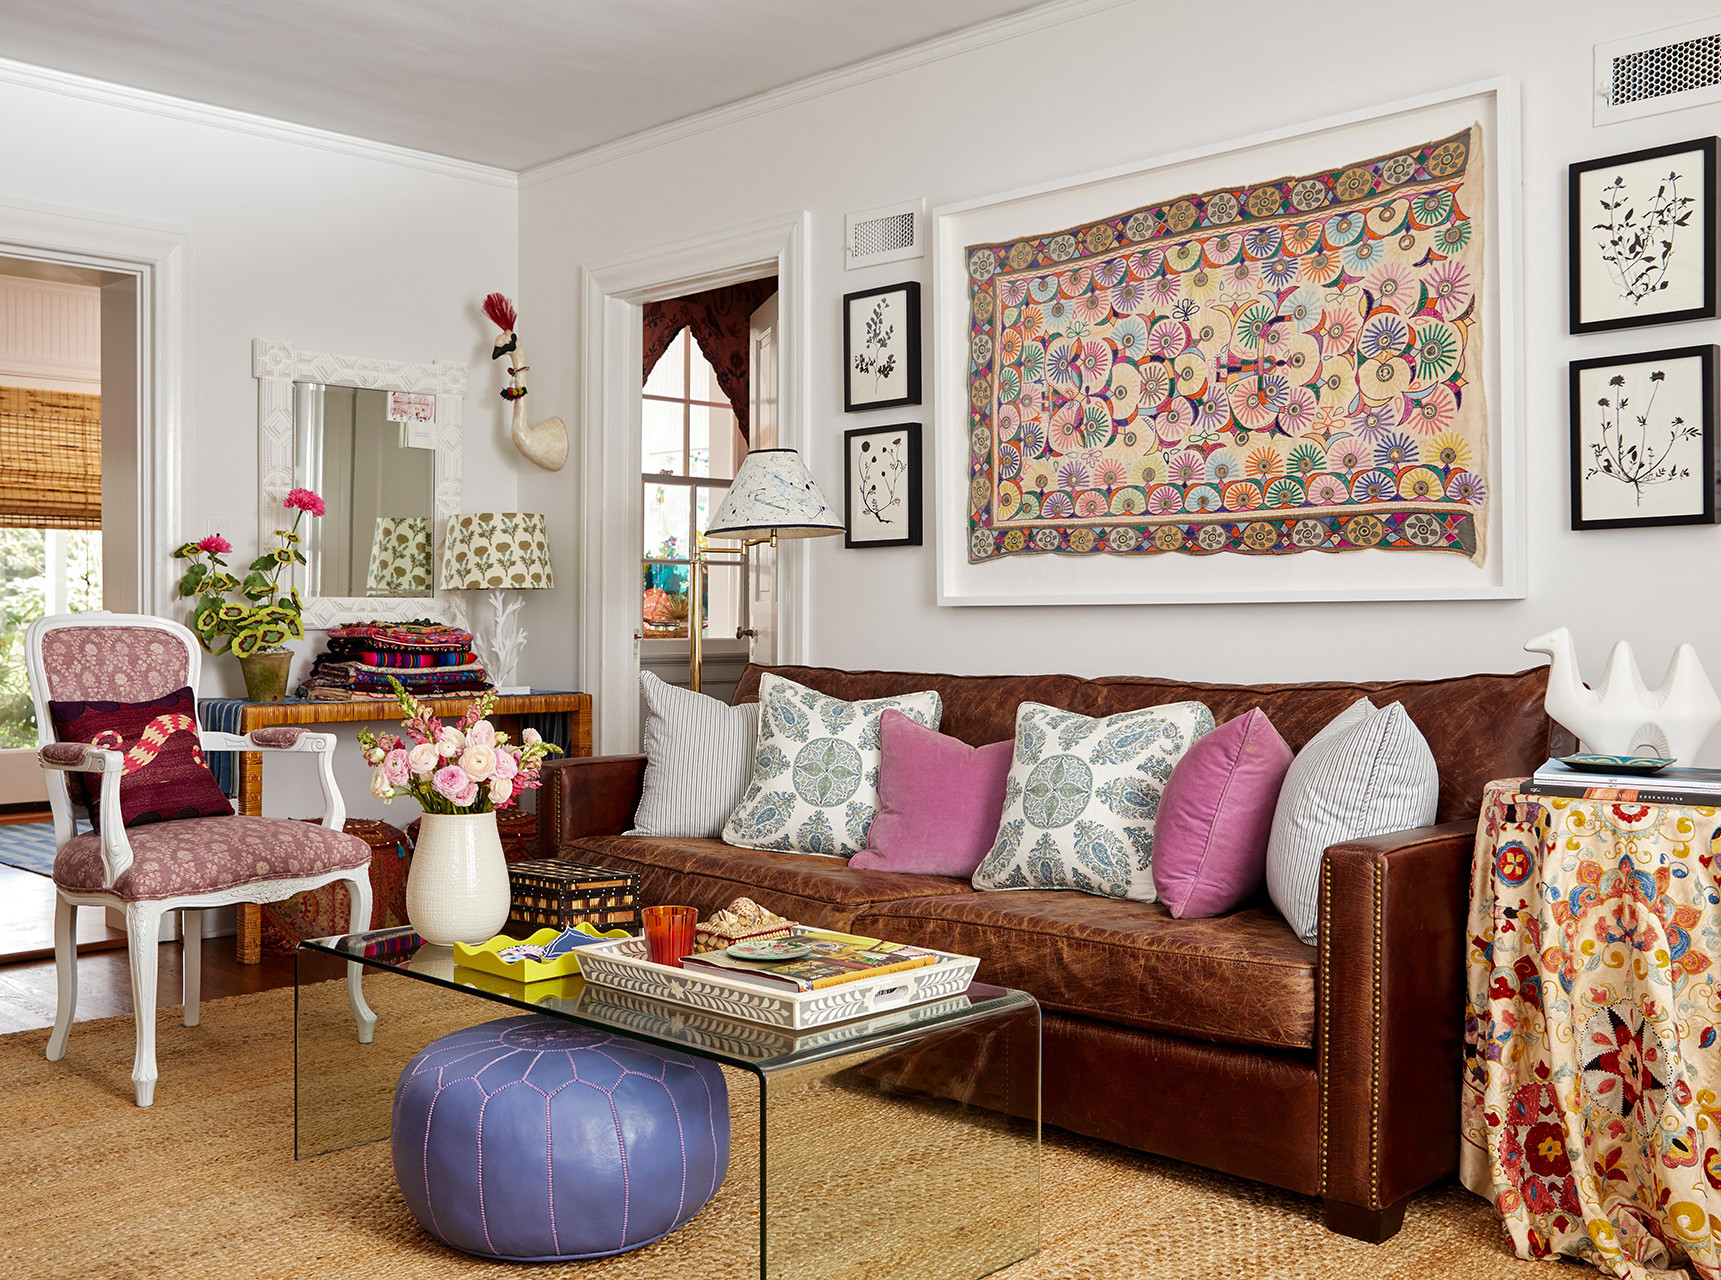 Brown Furniture Living Room Ideas
 Our Favorite Ways to Decorate with a Brown Sofa